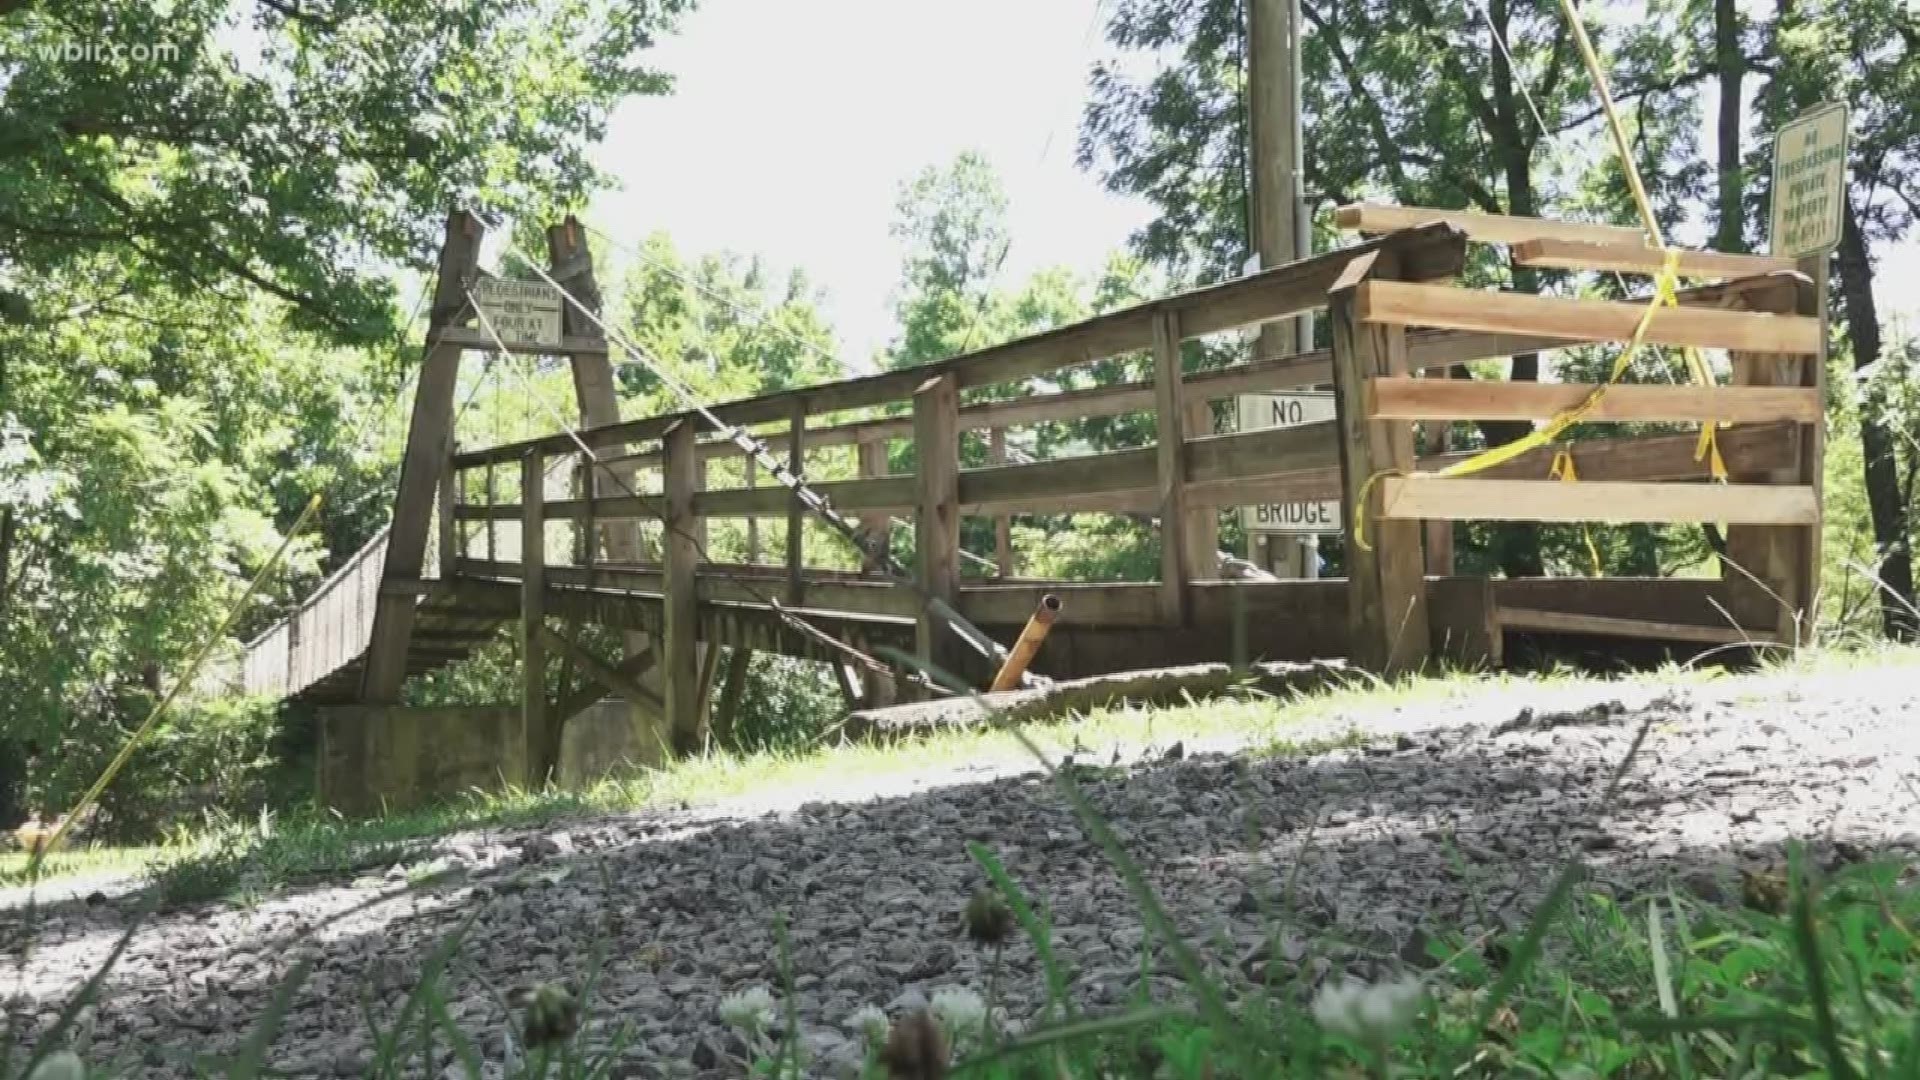 Crews from the Blount County highway department repaired and reopened the Dark Island swinging bridge.